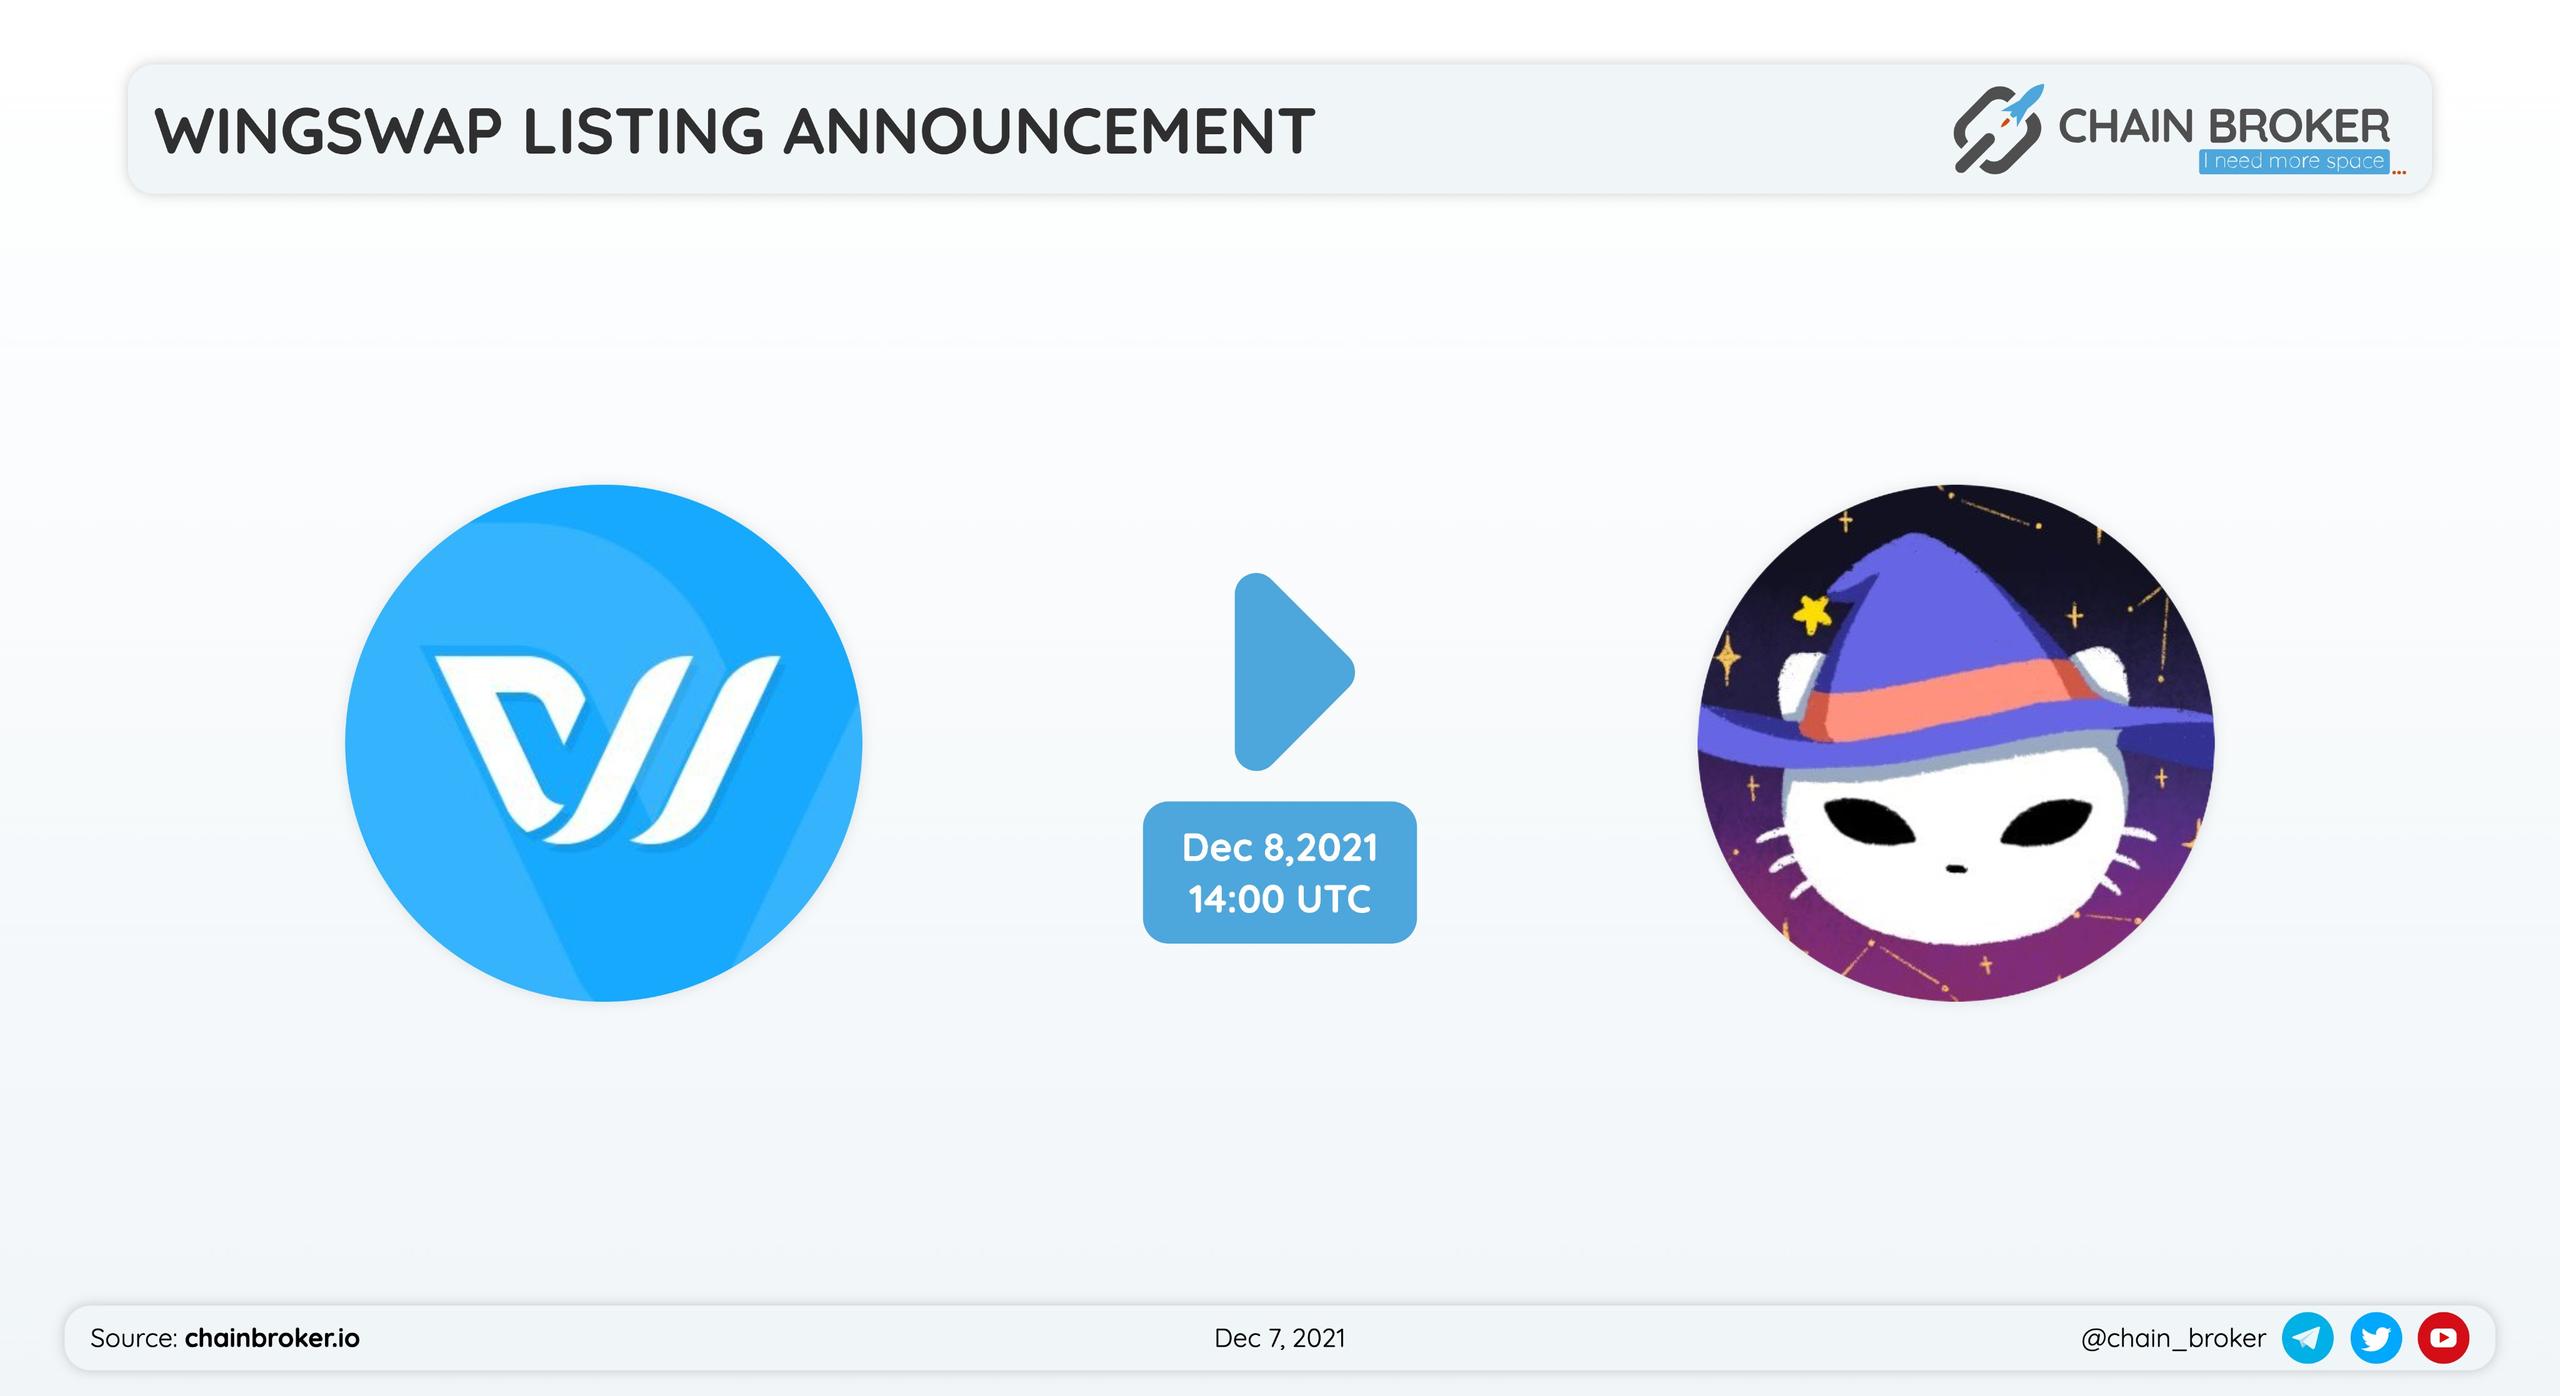 Wingswap will be listed on SpookySwap .